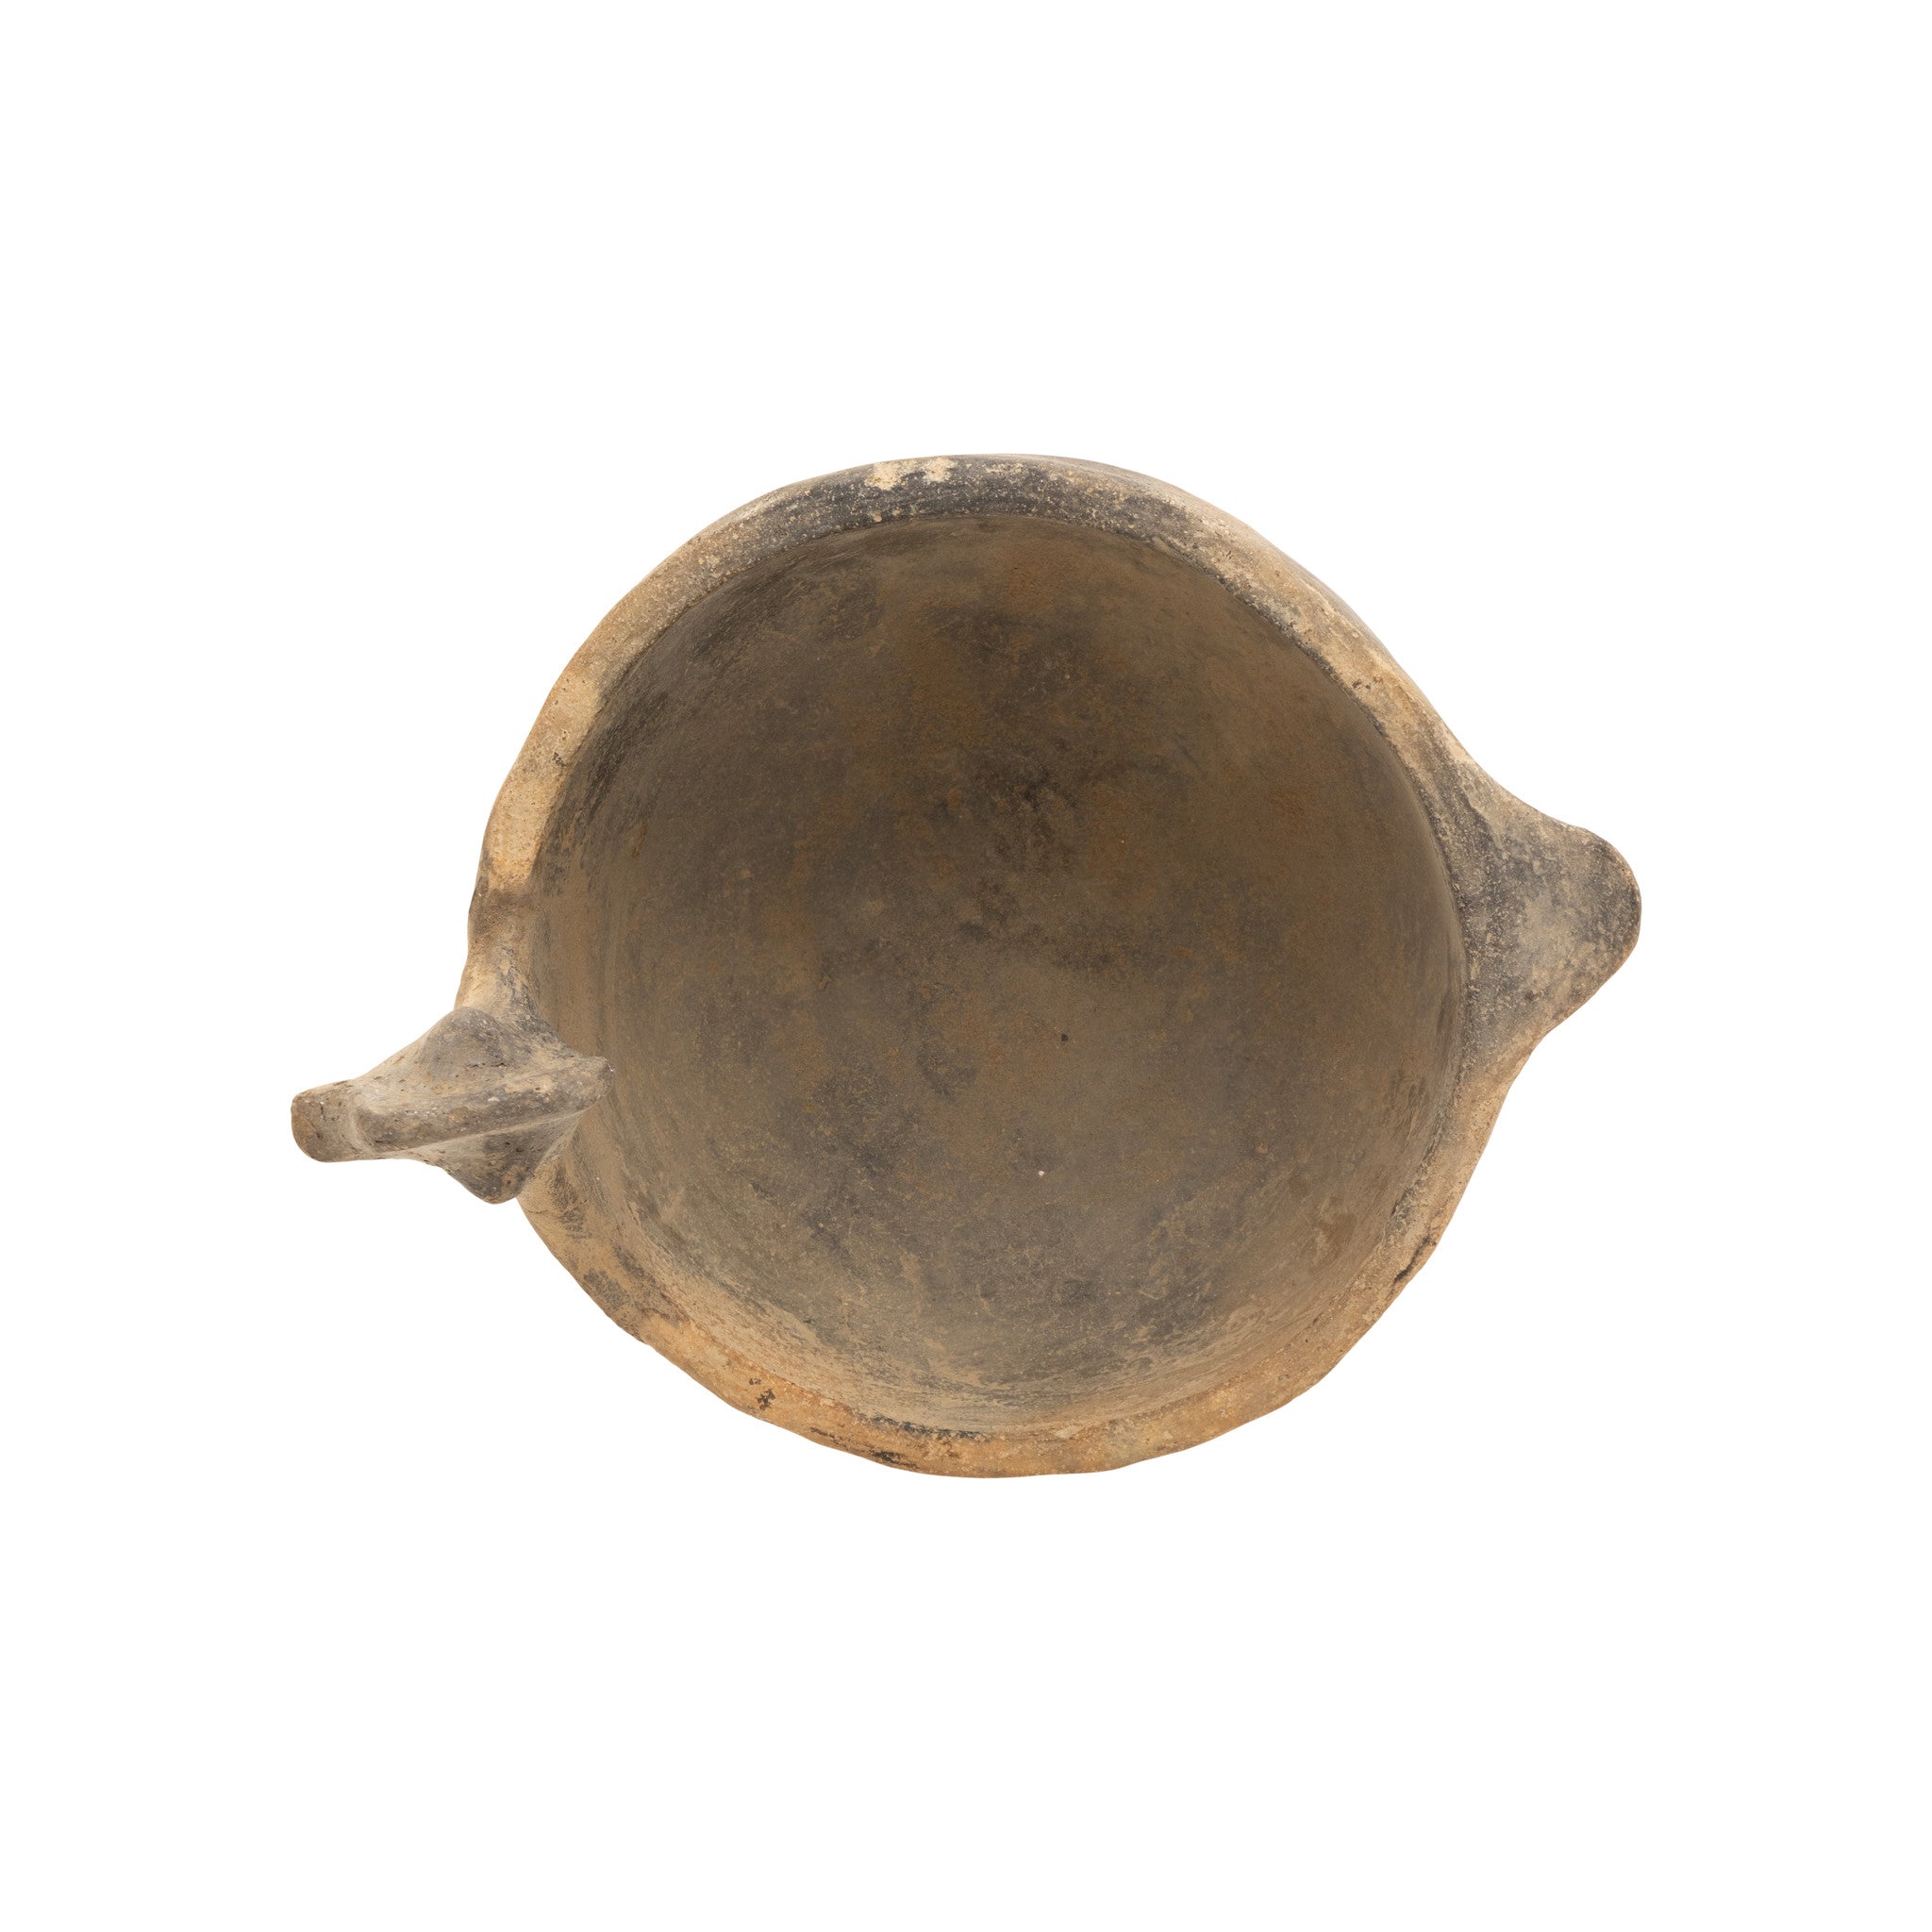 Mississippian Duck Effigy Pottery Bowl